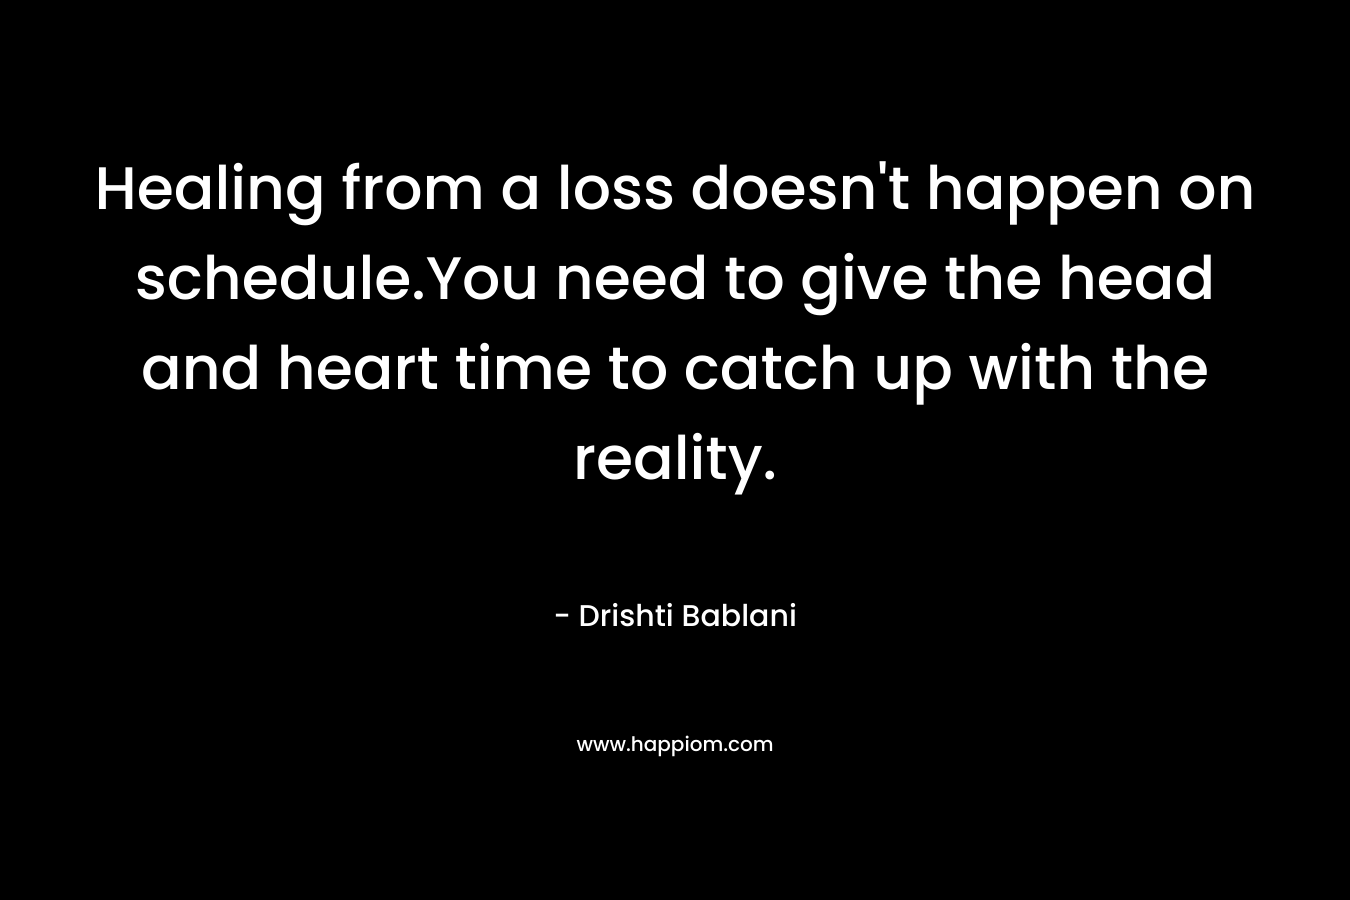 Healing from a loss doesn’t happen on schedule.You need to give the head and heart time to catch up with the reality. – Drishti Bablani